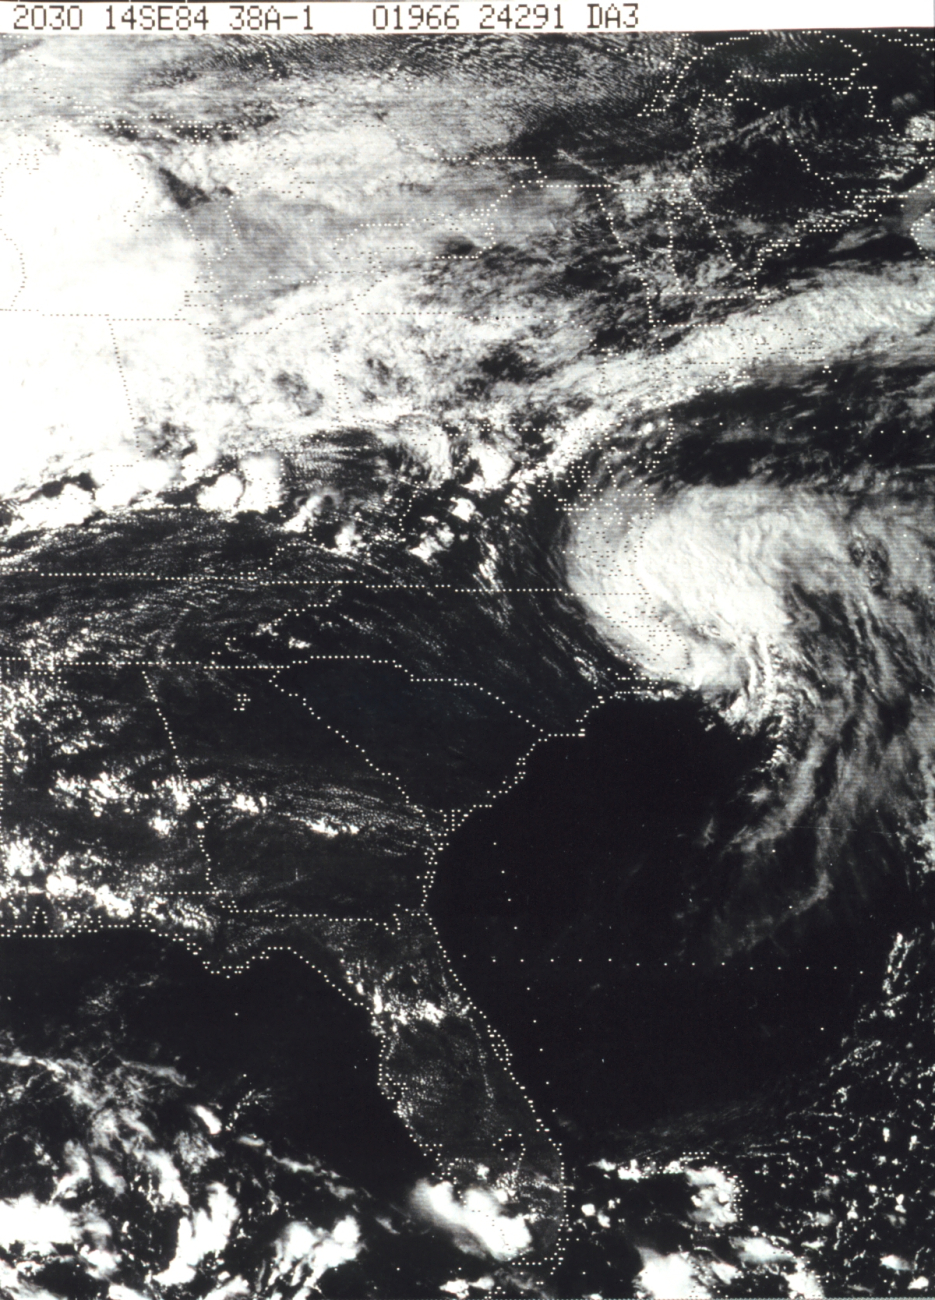 The remains of Hurricane Diana, still a tropical storm, heading offshore and out to sea